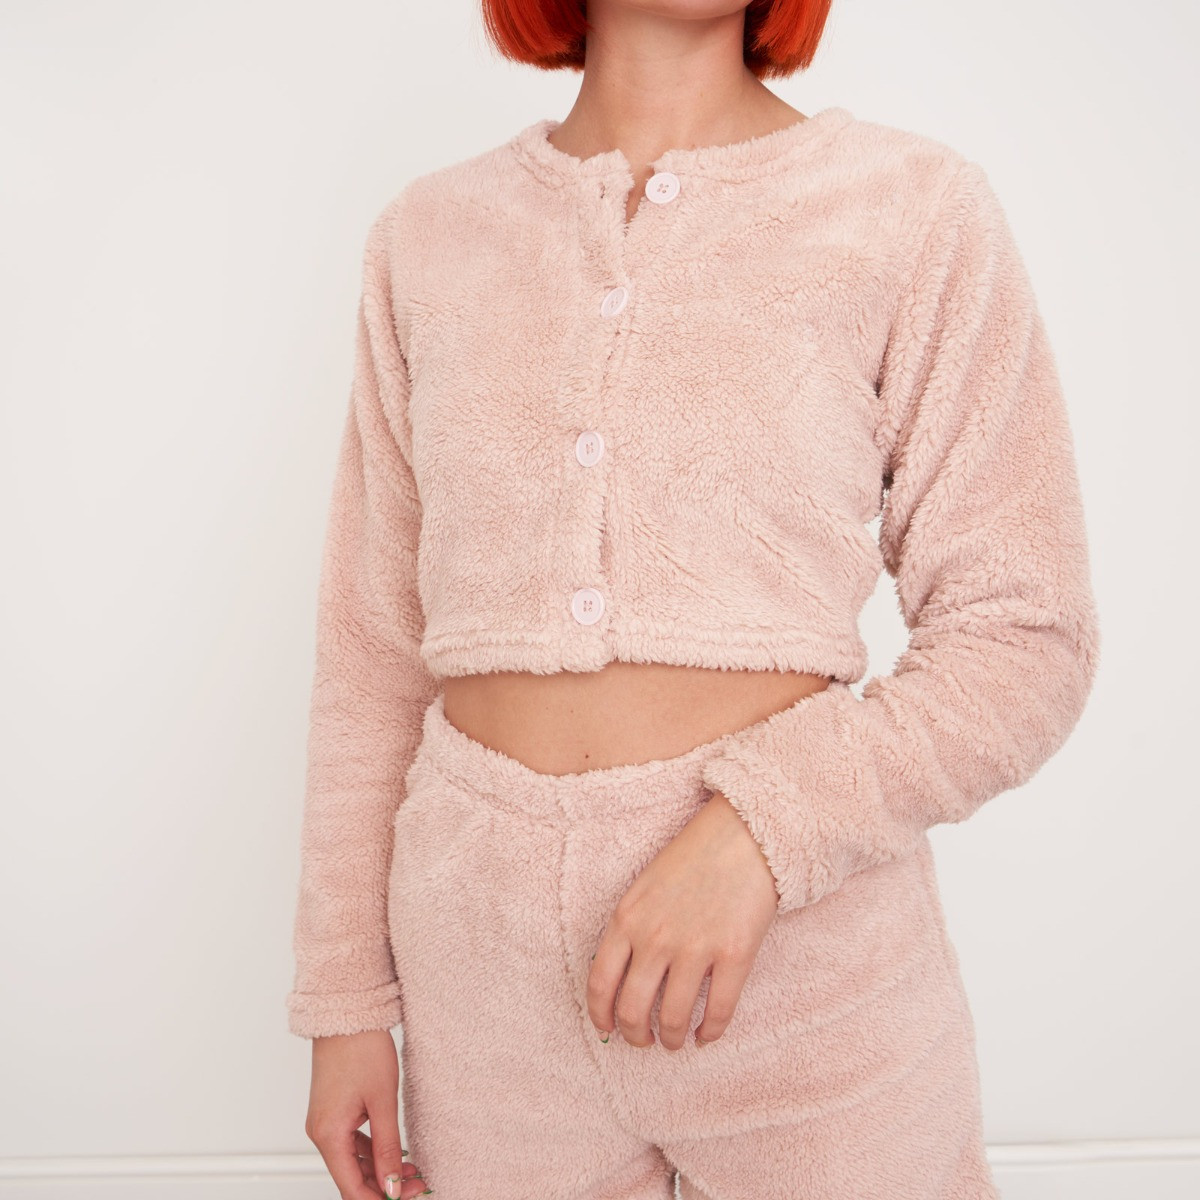 OHS Teddy Fleece Cropped Buttoned Cardigan - Blush>